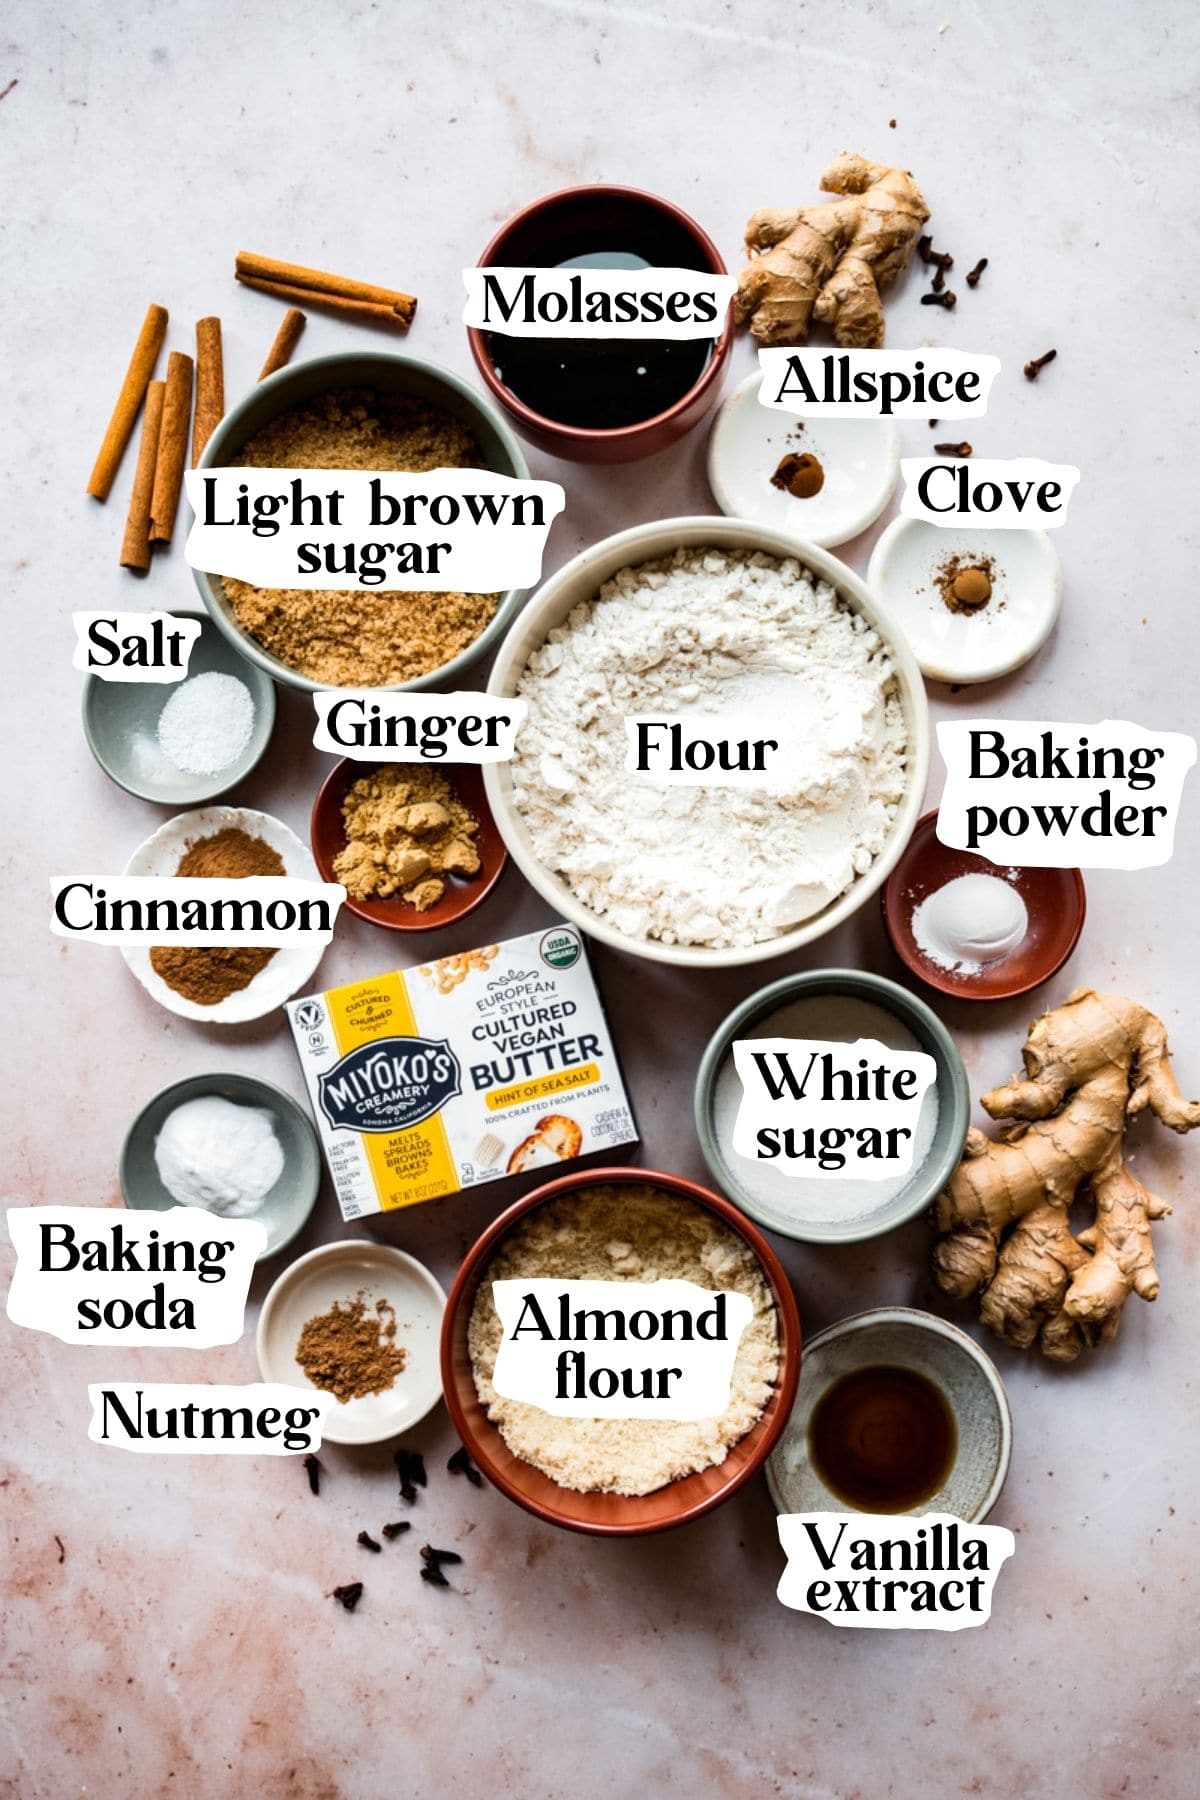 Overhead view of vegan ginger cookie ingredients, including flour, almond flour, sugar, and ground ginger.